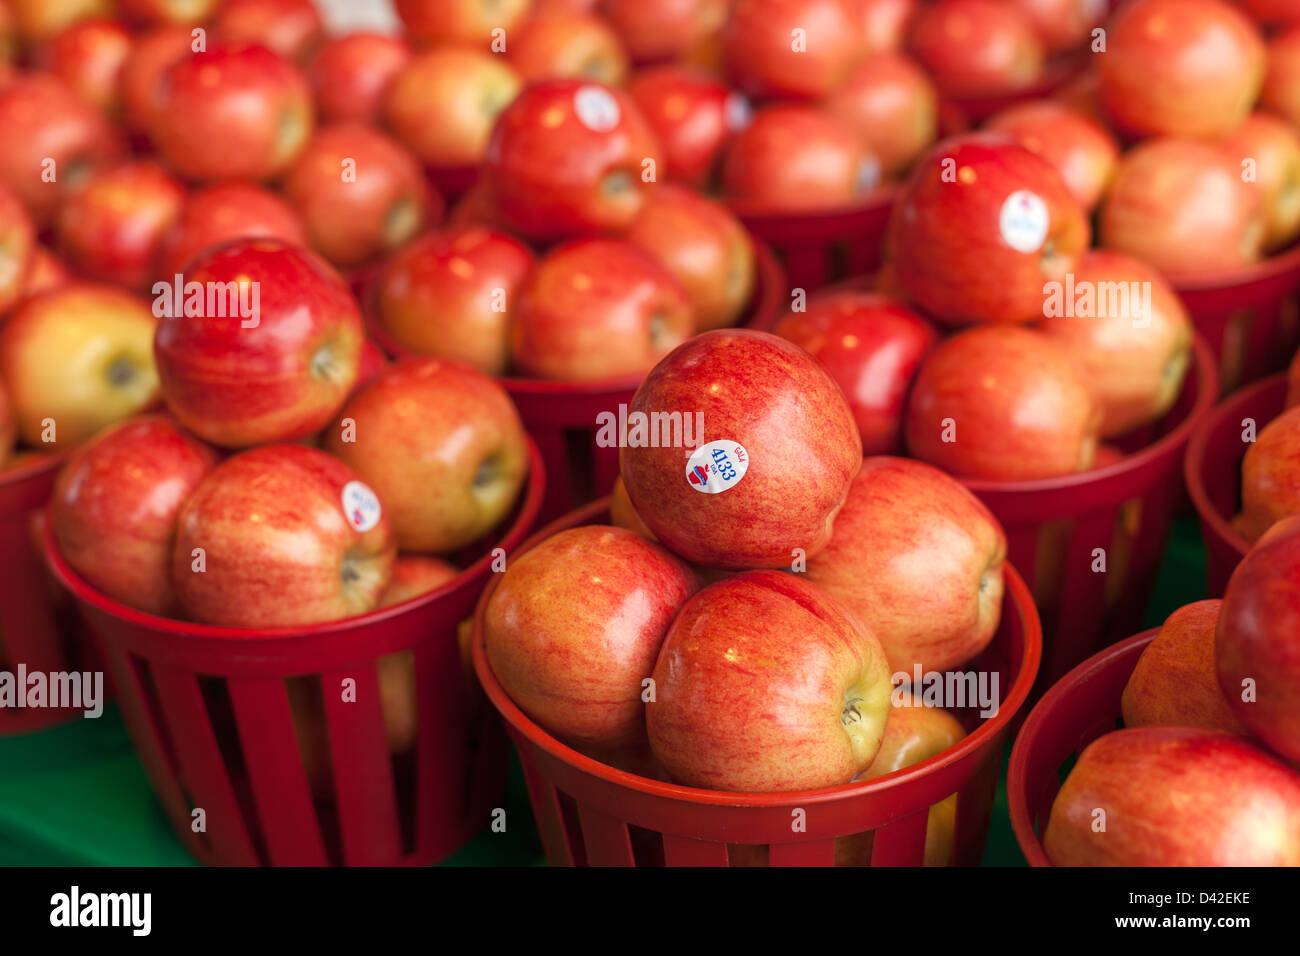 apples on display at a farmers market Stock Photo